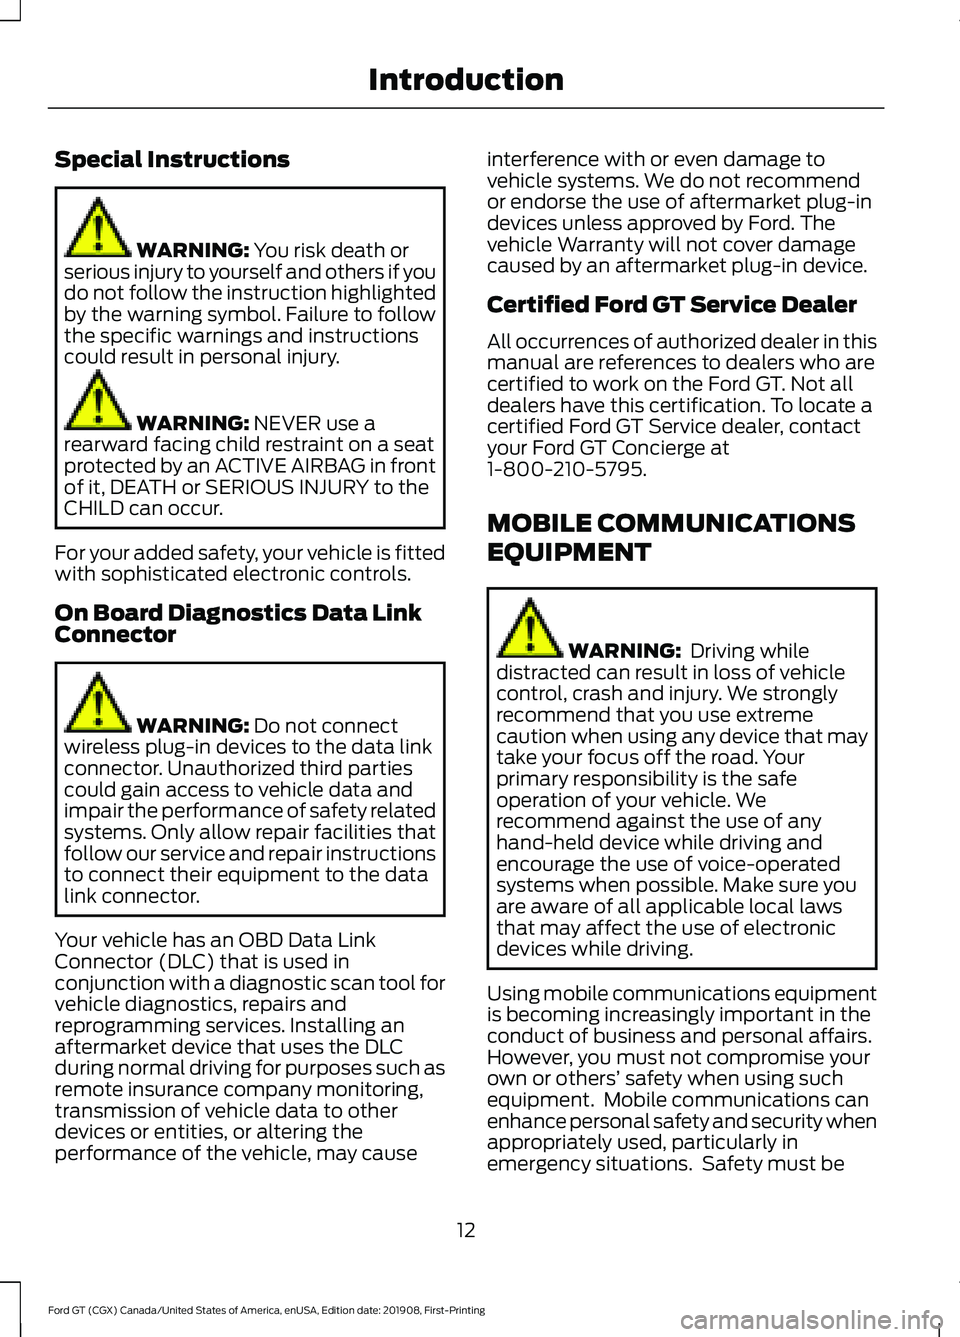 FORD GT 2020  Owners Manual Special Instructions
WARNING: You risk death or
serious injury to yourself and others if you
do not follow the instruction highlighted
by the warning symbol. Failure to follow
the specific warnings an